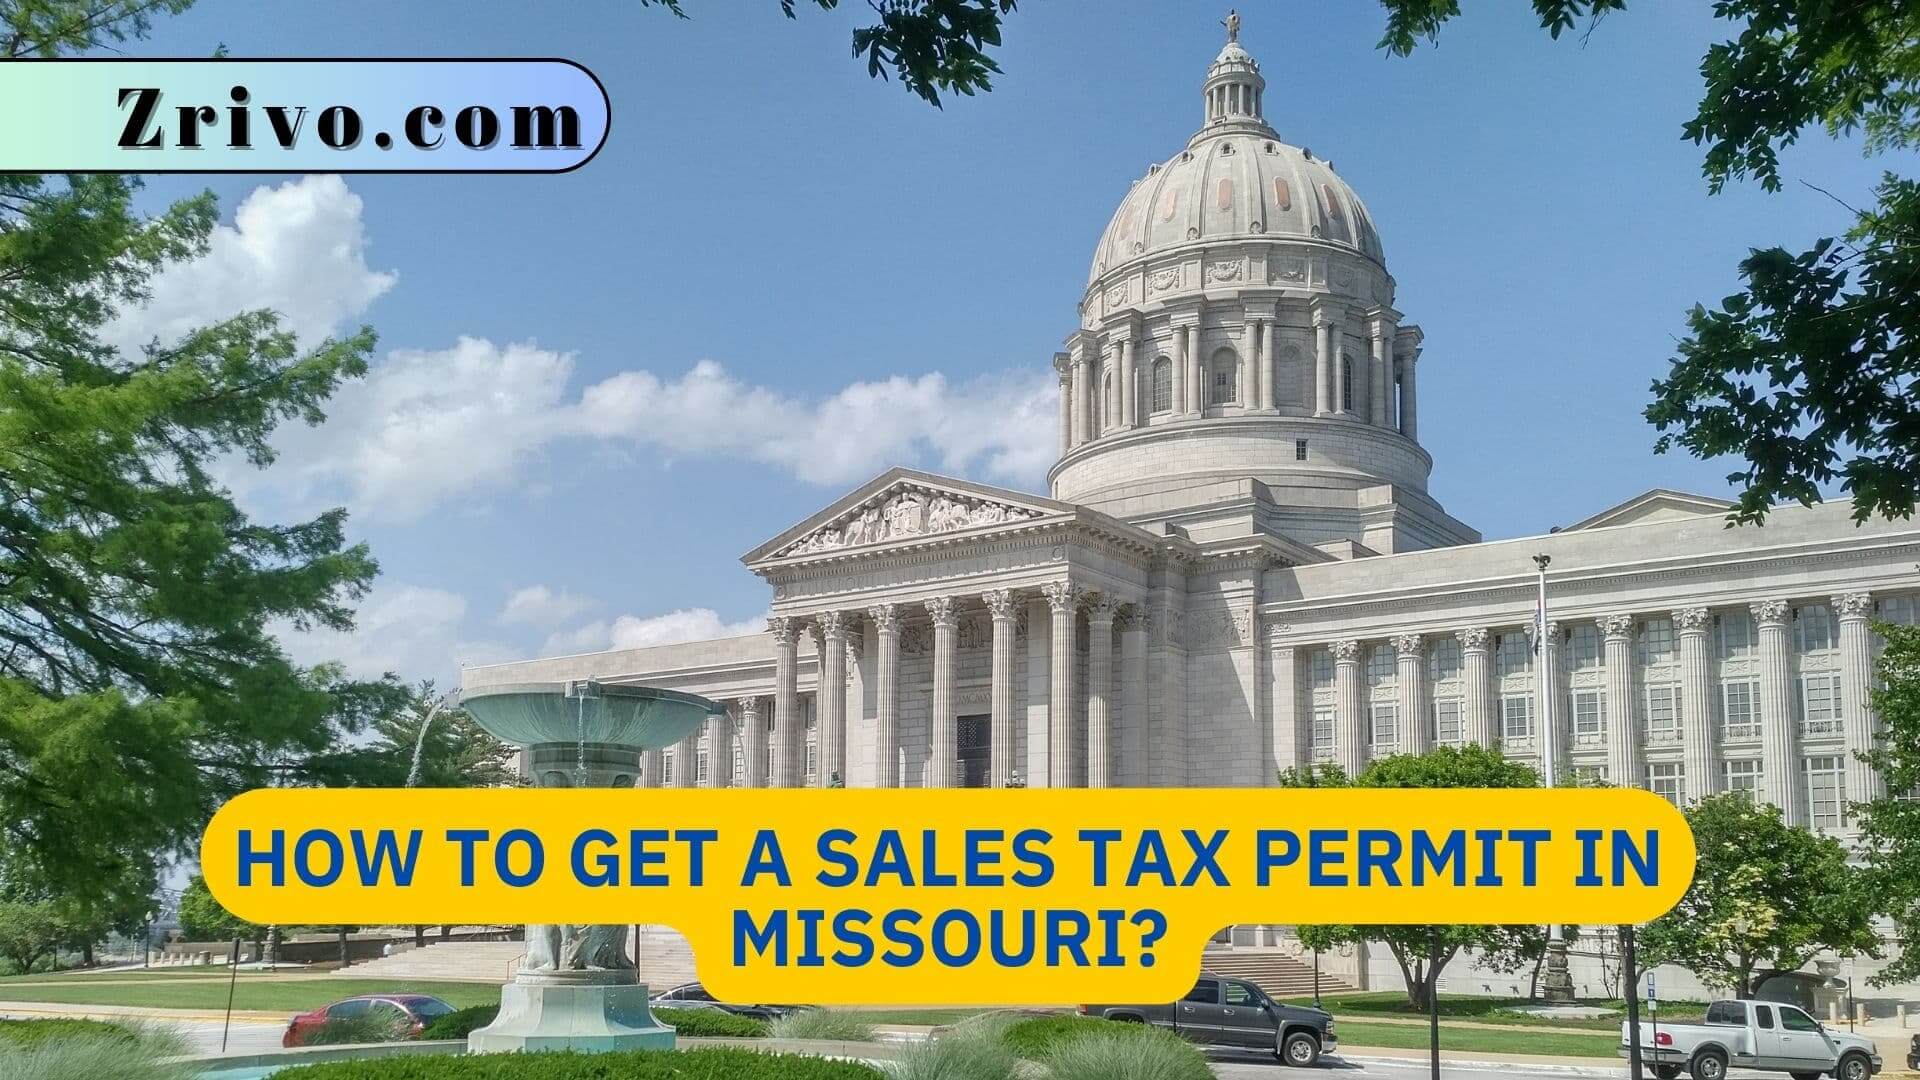 How to Get a Sales Tax Permit in Missouri